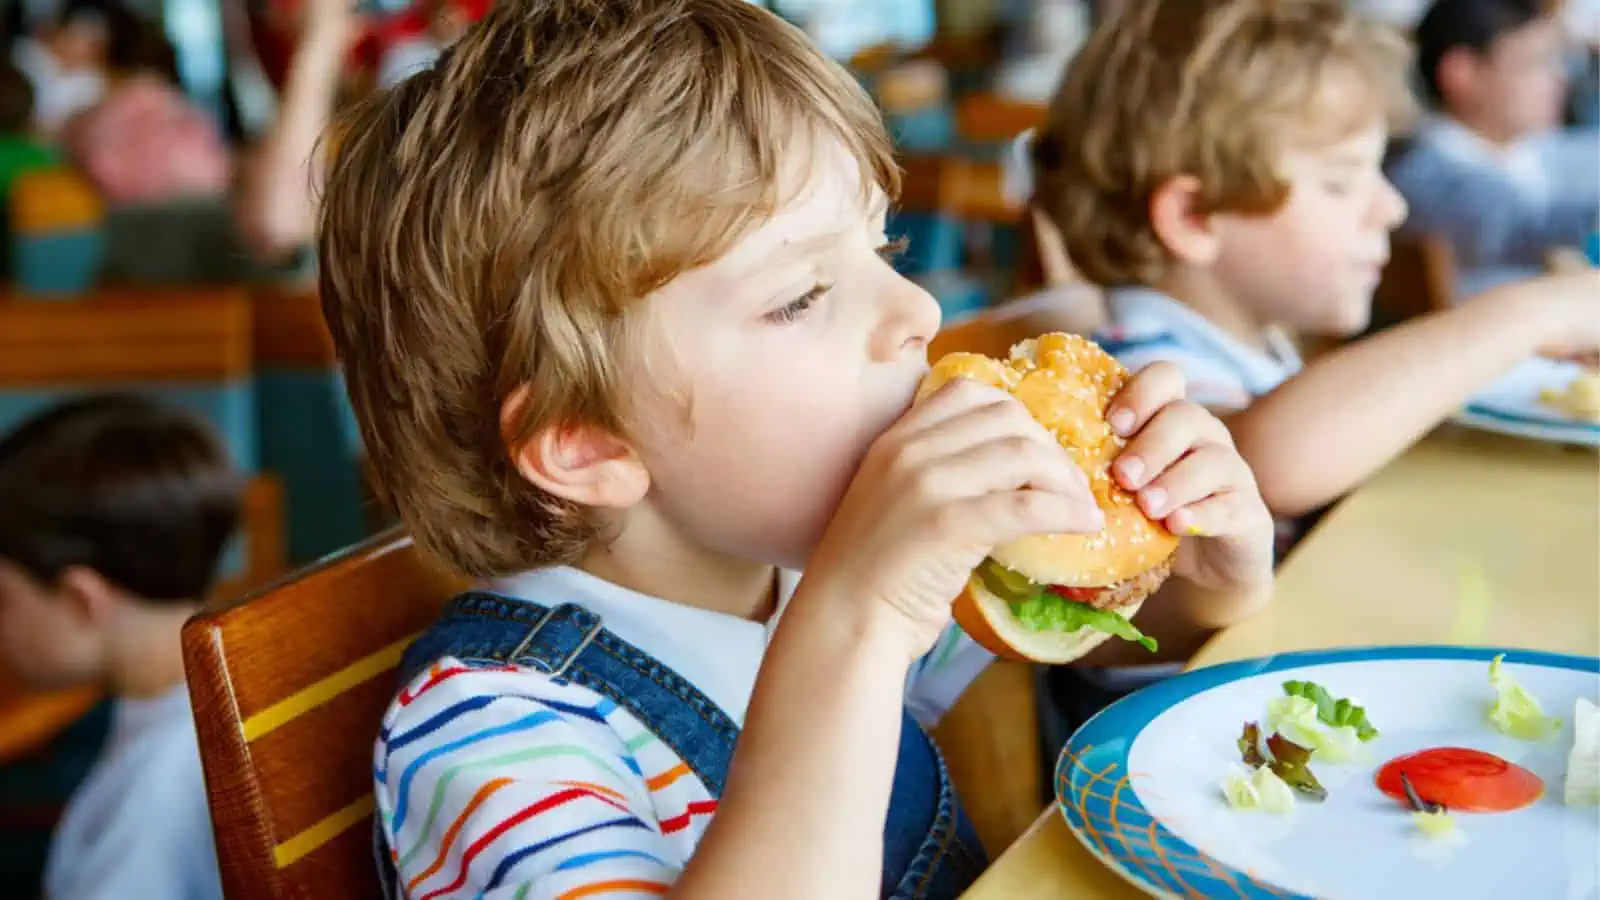 Child eating burger sitting in school canteen